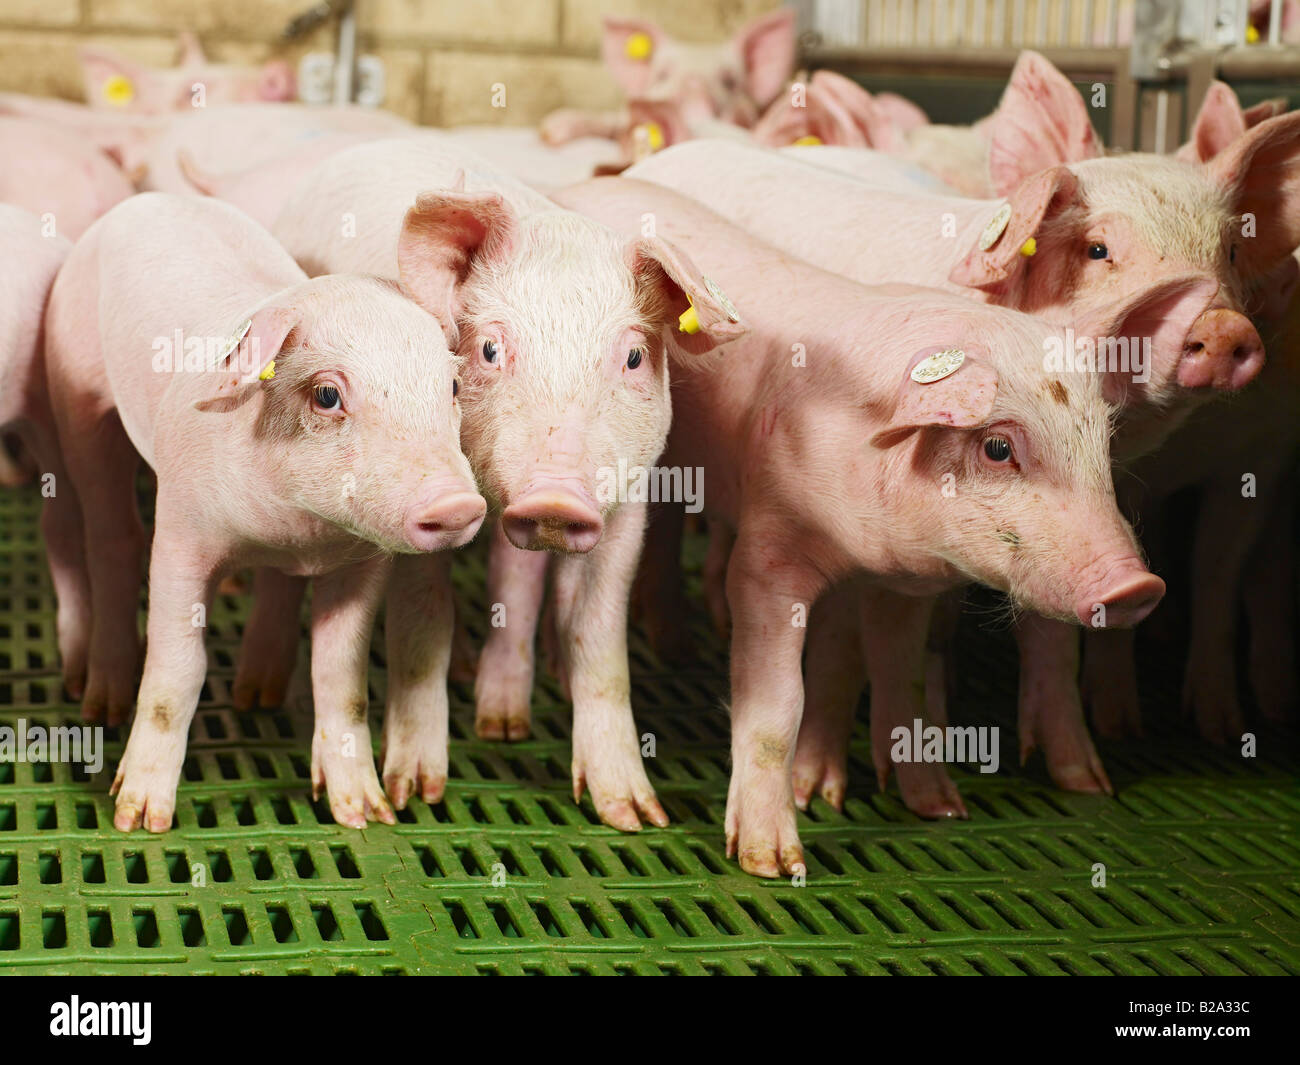 animal suffering, many piglets in a small pig sty Sus scrofa domestica PIG BREEDING, Heinsberg, Germany, Europe Tierleid Stock Photo